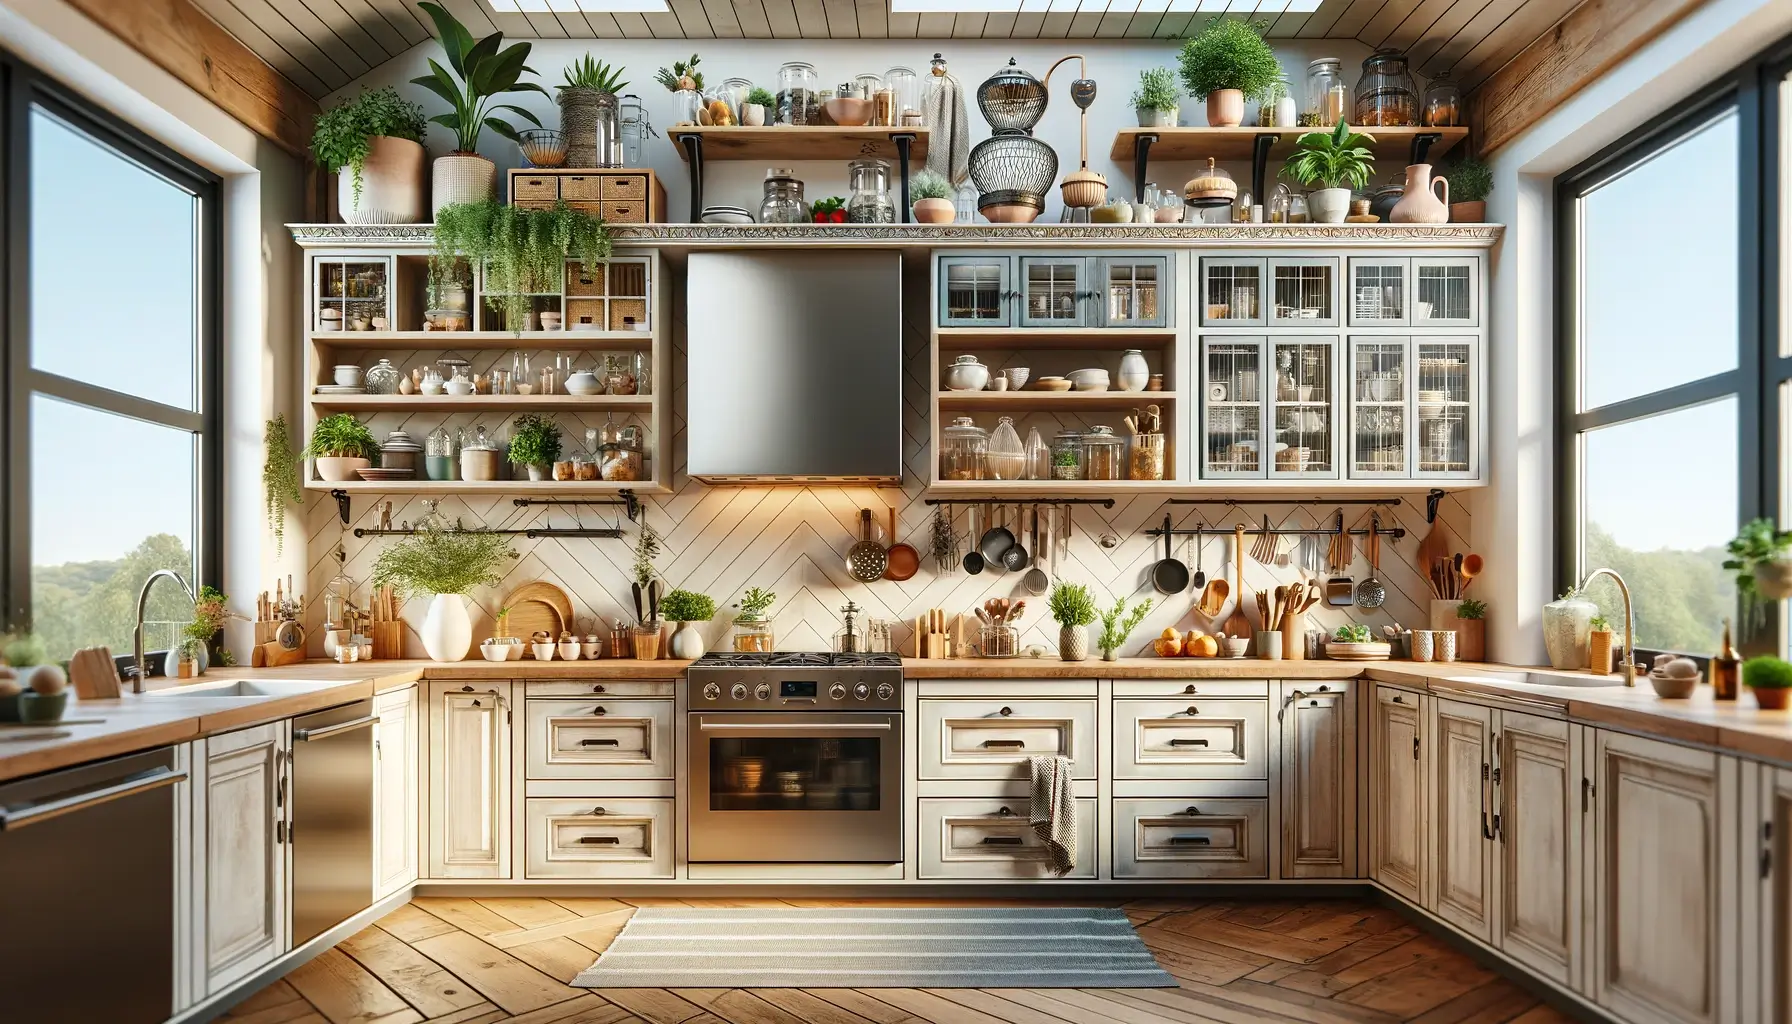 Should Kitchen Cabinets Go To Ceiling? Kitchen Product Hub